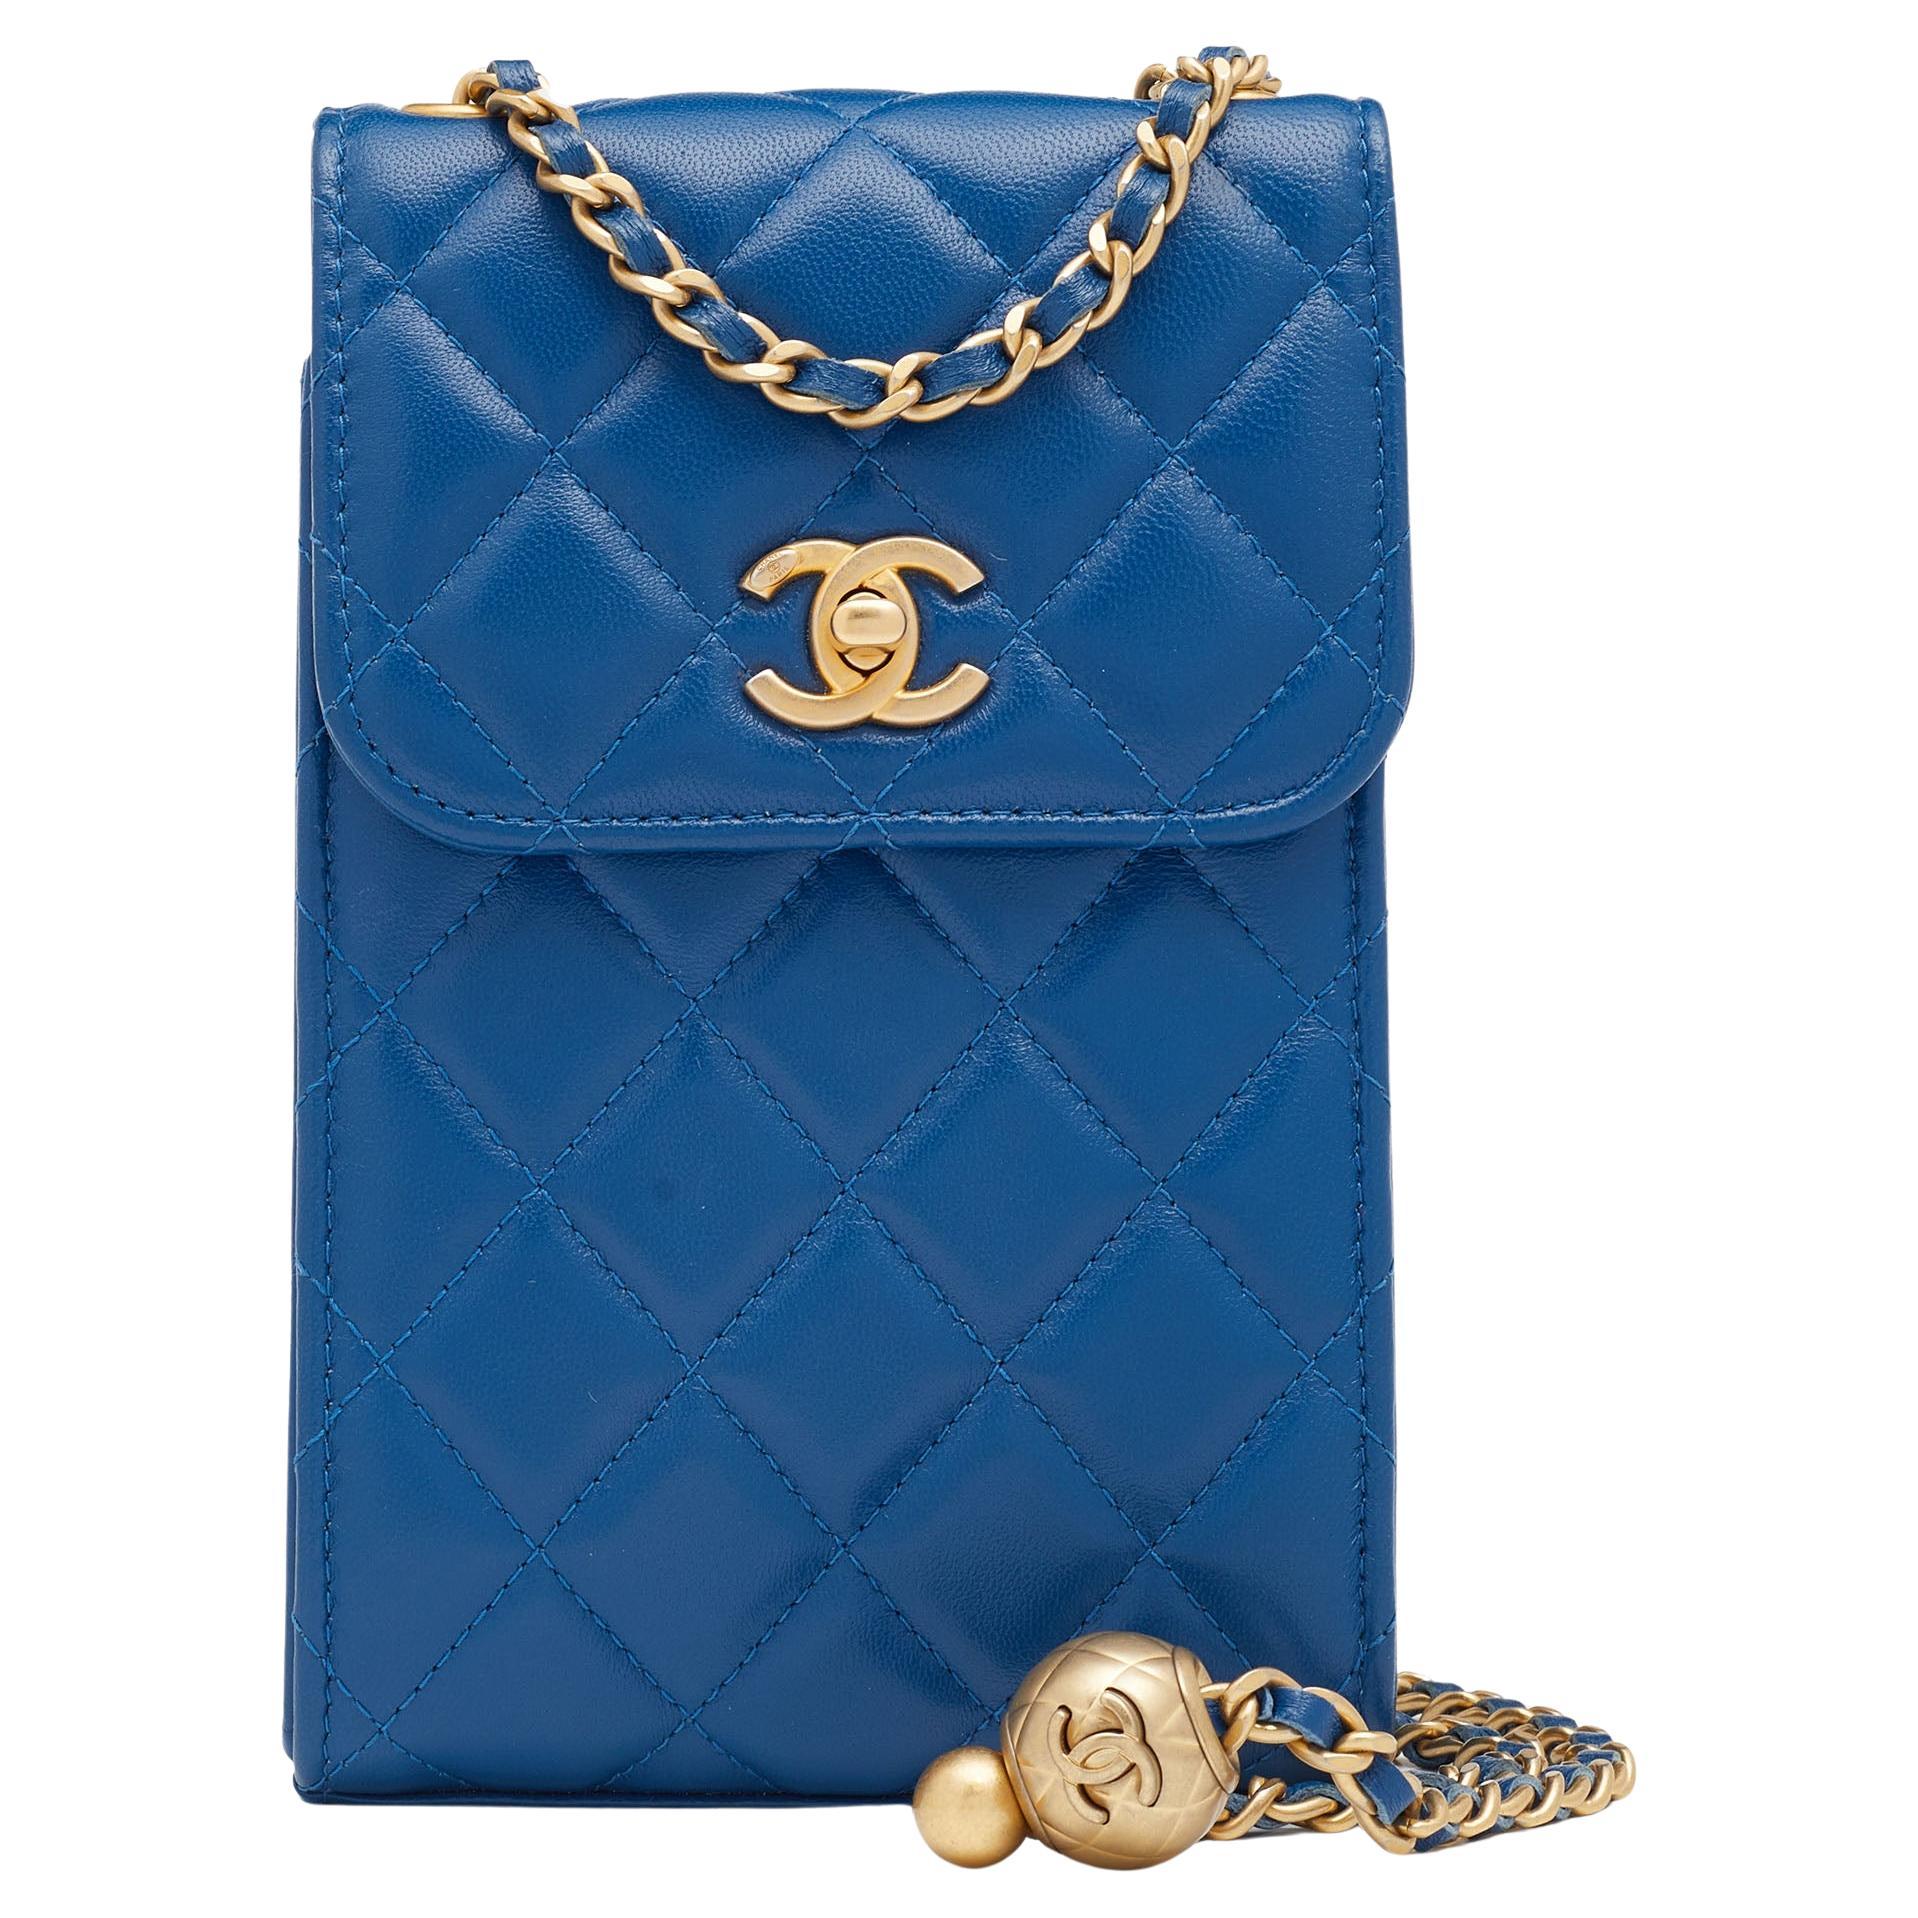 Chanel Blue Quilted Leather Pearl Crush Phone Holder Crossbody